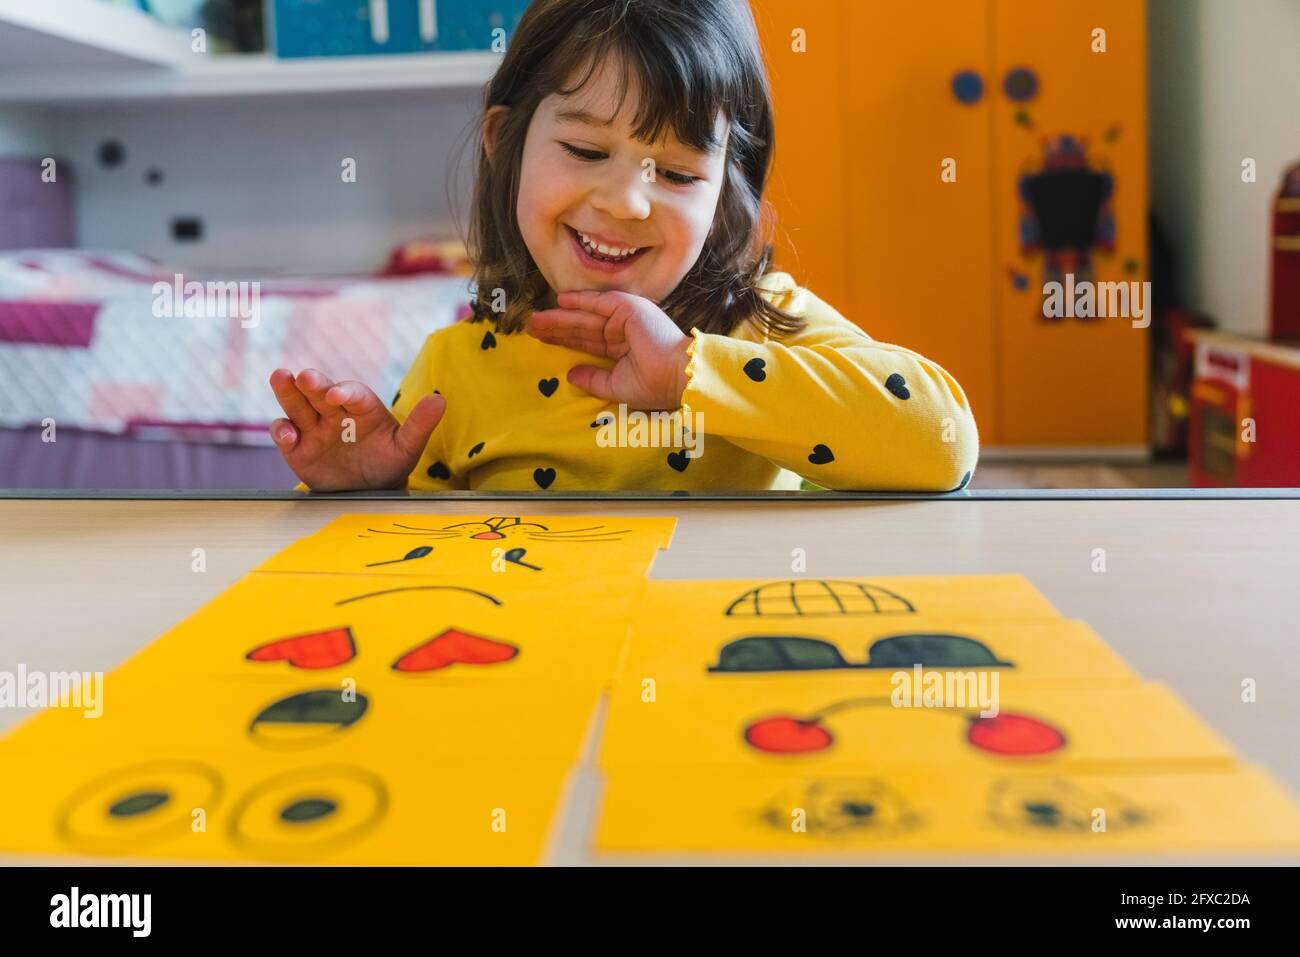 Happy girl arranging emoticons on table in playroom at home Stock Photo